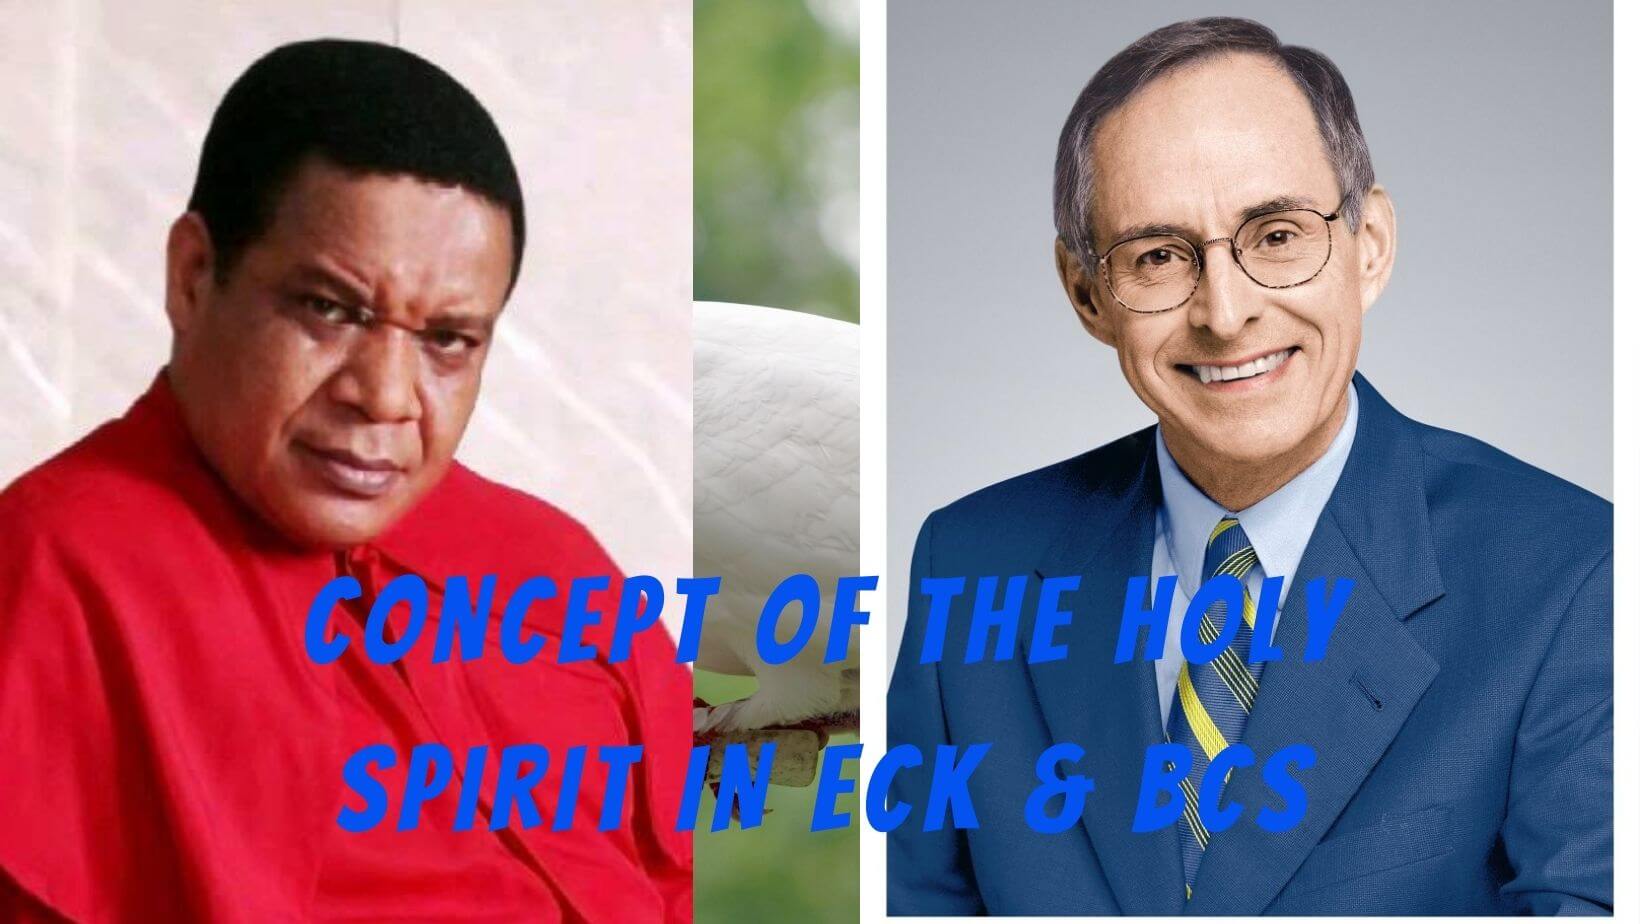 The Concept Of The Holy Spirit In Eckankar & Brotherhood Of Cross And Star